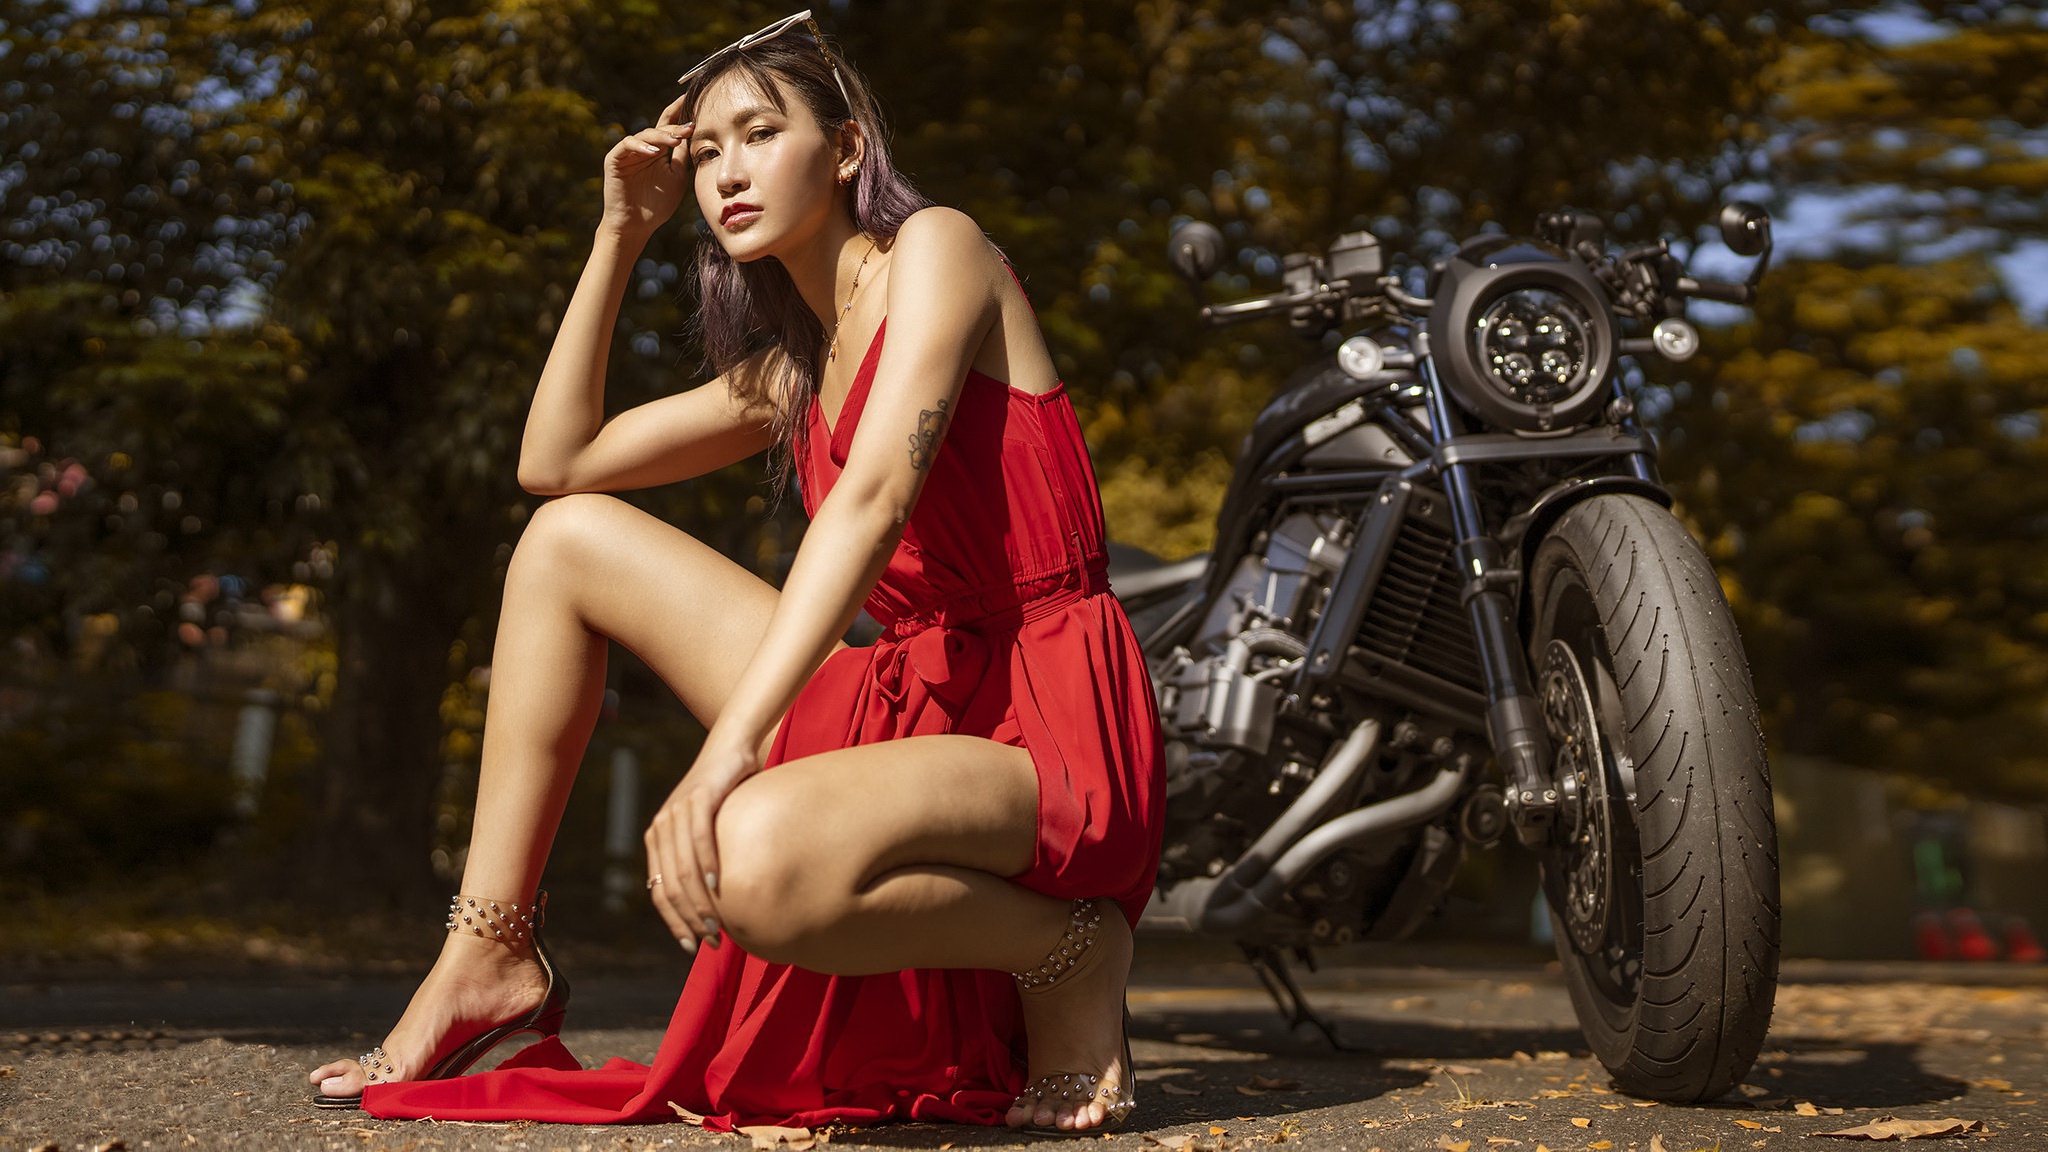 Asian Women Model Motorcycle Women With Motorcycles Dress Red Dress Red Clothing Women Outdoors Look 2048x1152